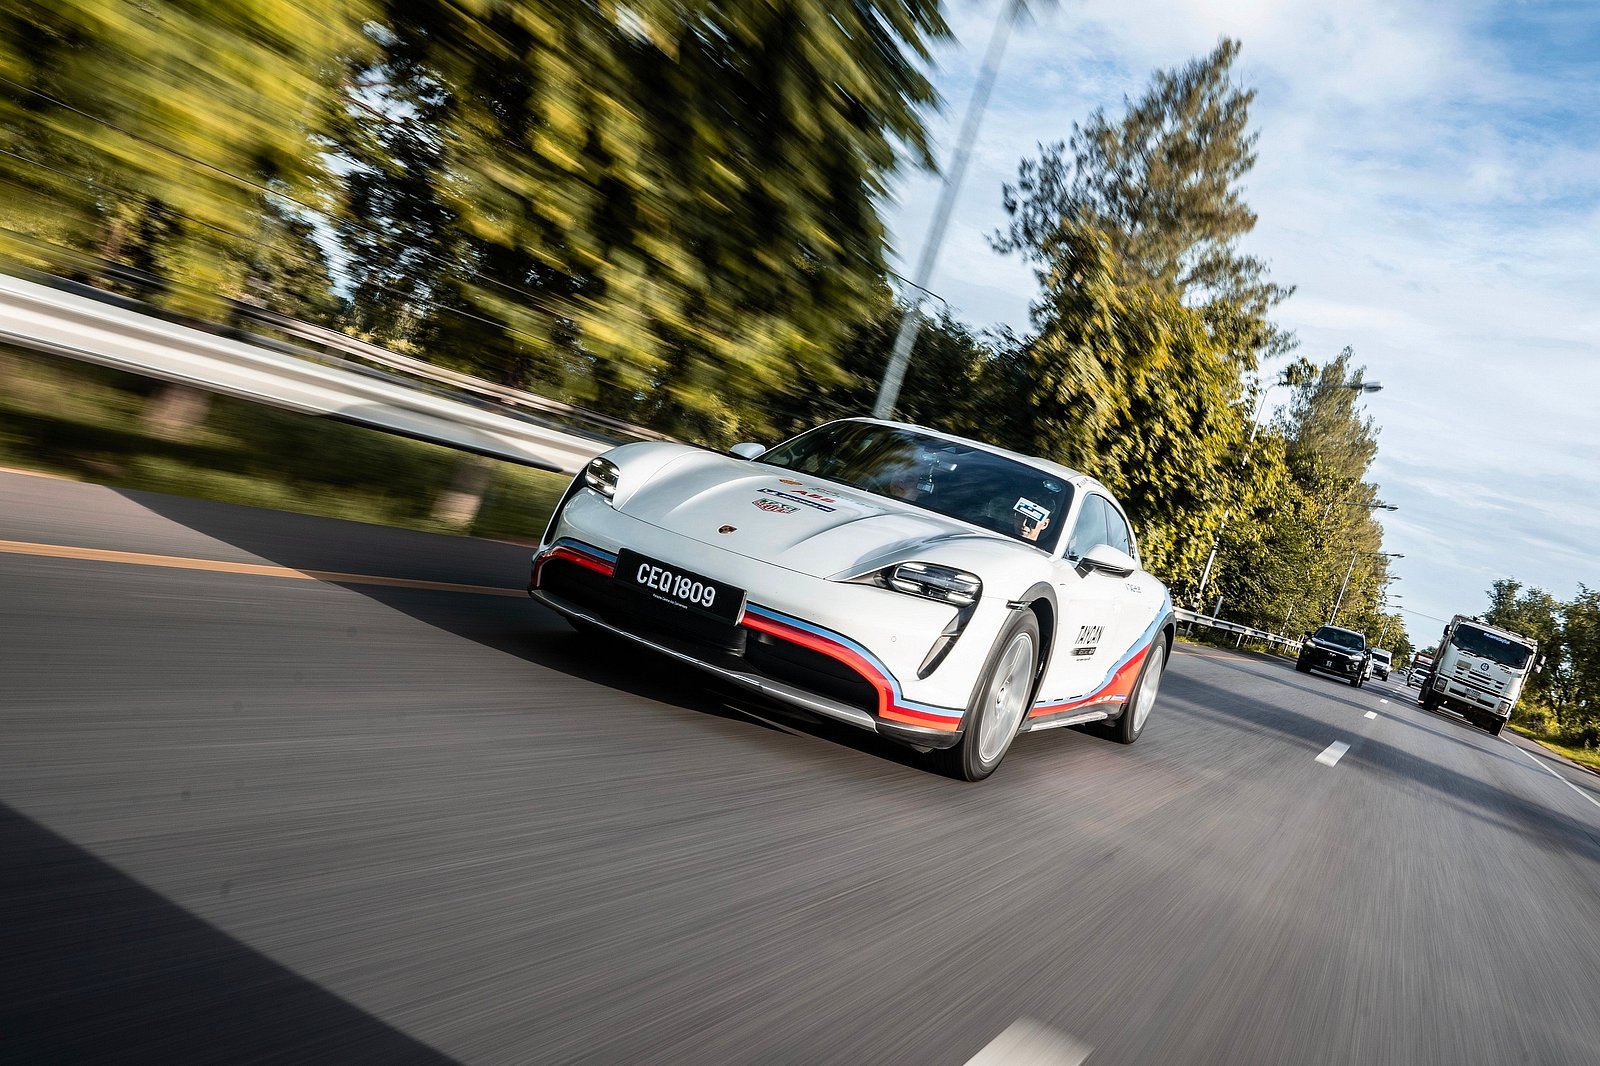 luxury, porsche taycan claims another record